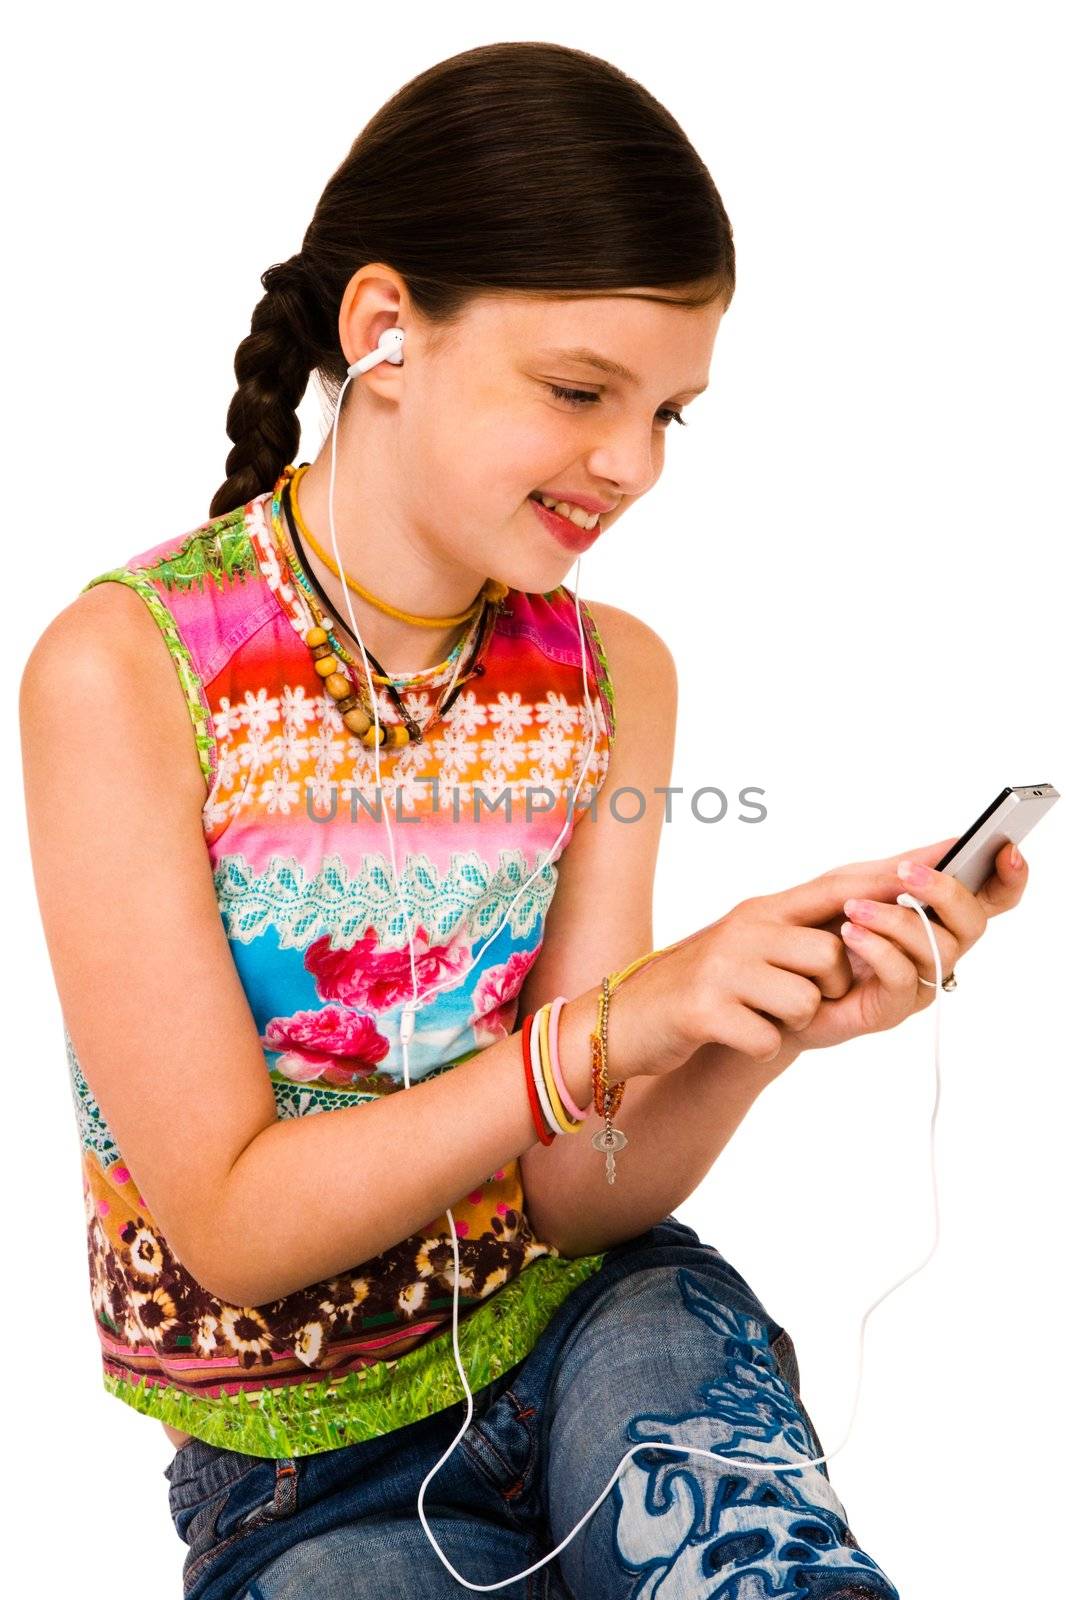 Cute girl listening to music on MP3 player isolated over white